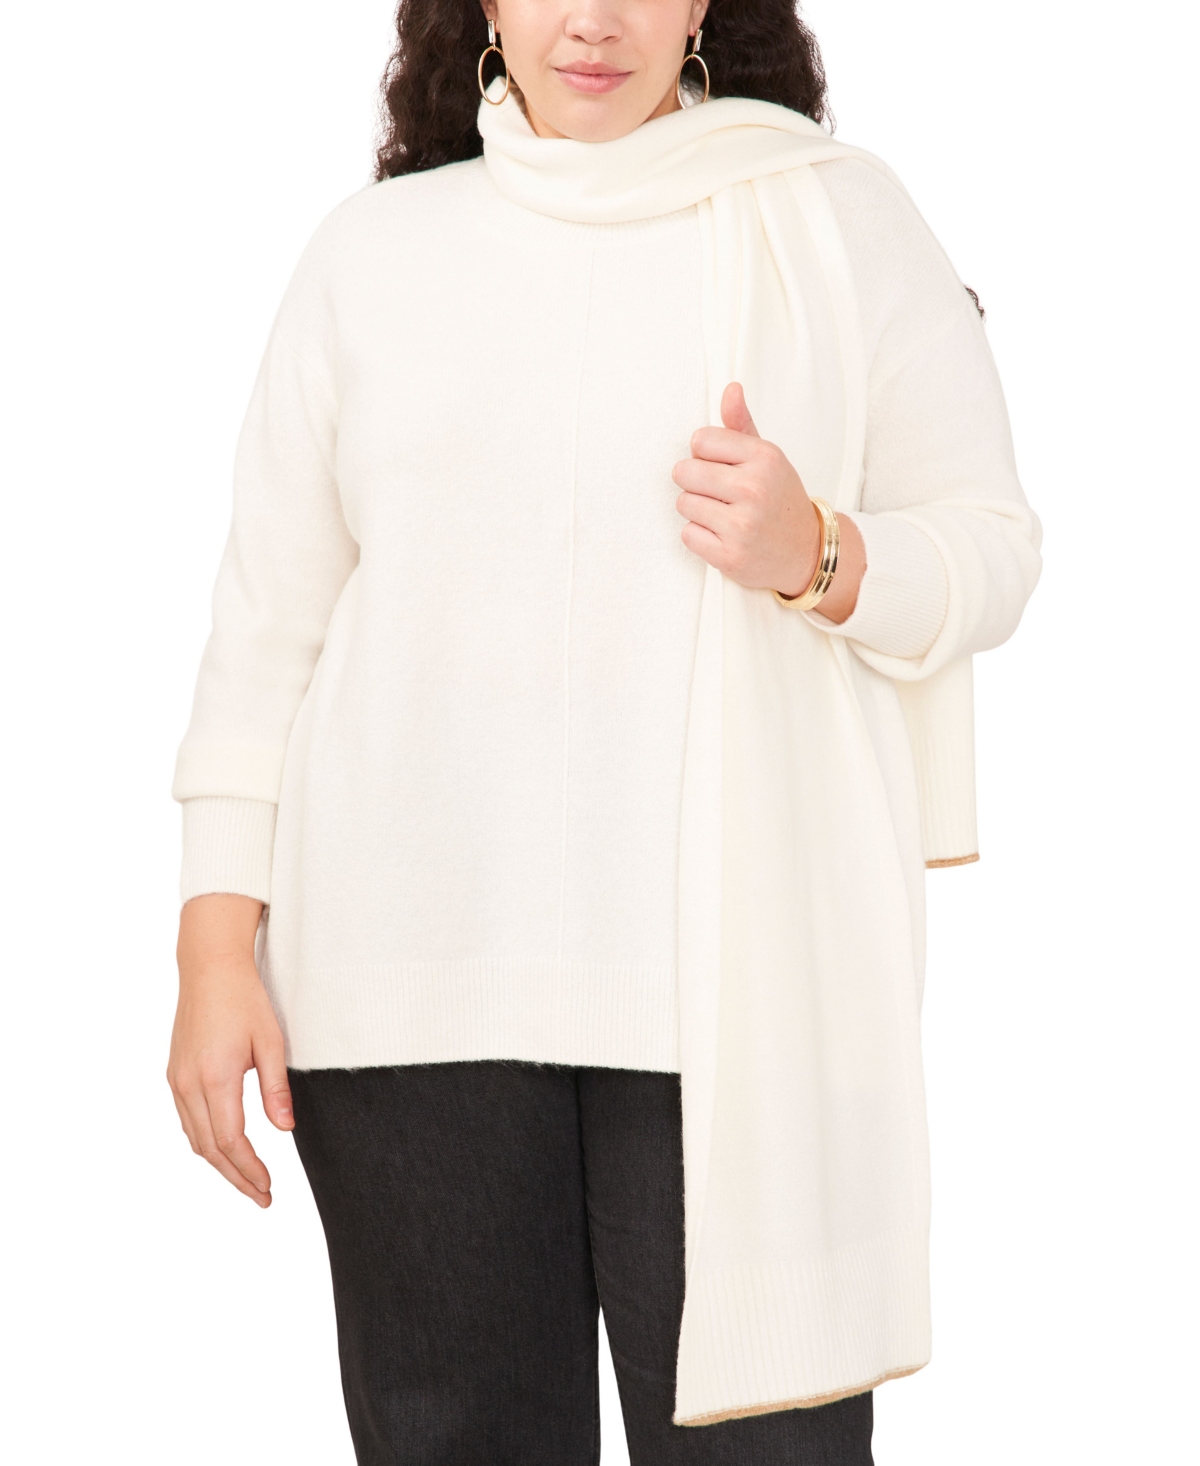 Vince Camuto Trendy Plus Size Scarf and Crewneck Sweater Set - Latte Heather $19.56 + Free Shipping